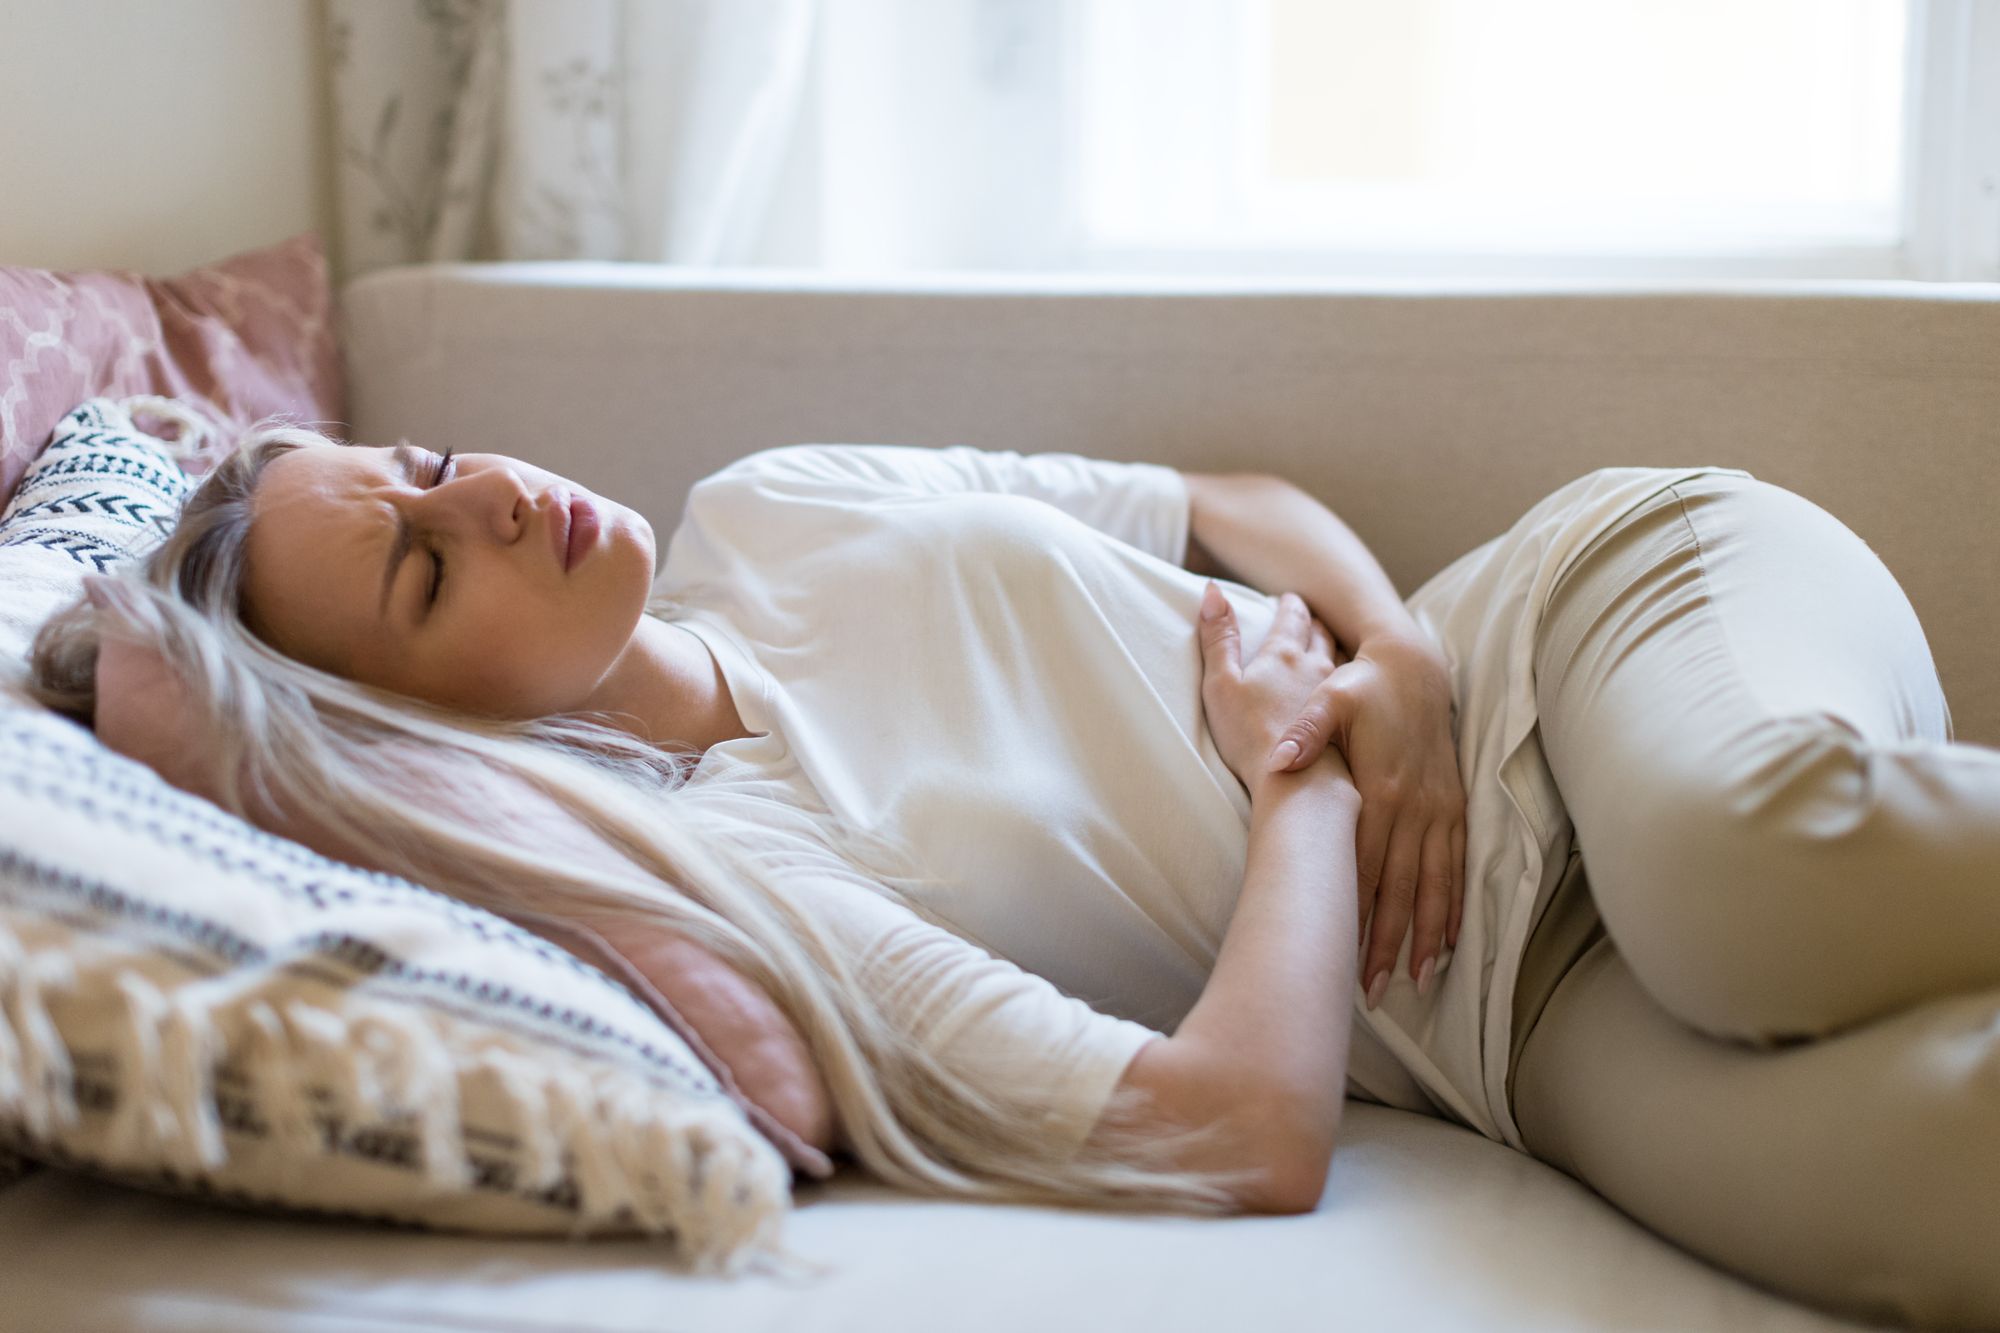 Woman With Gastrointestinal Issues By DimaBerlin | www.shutterstock.com